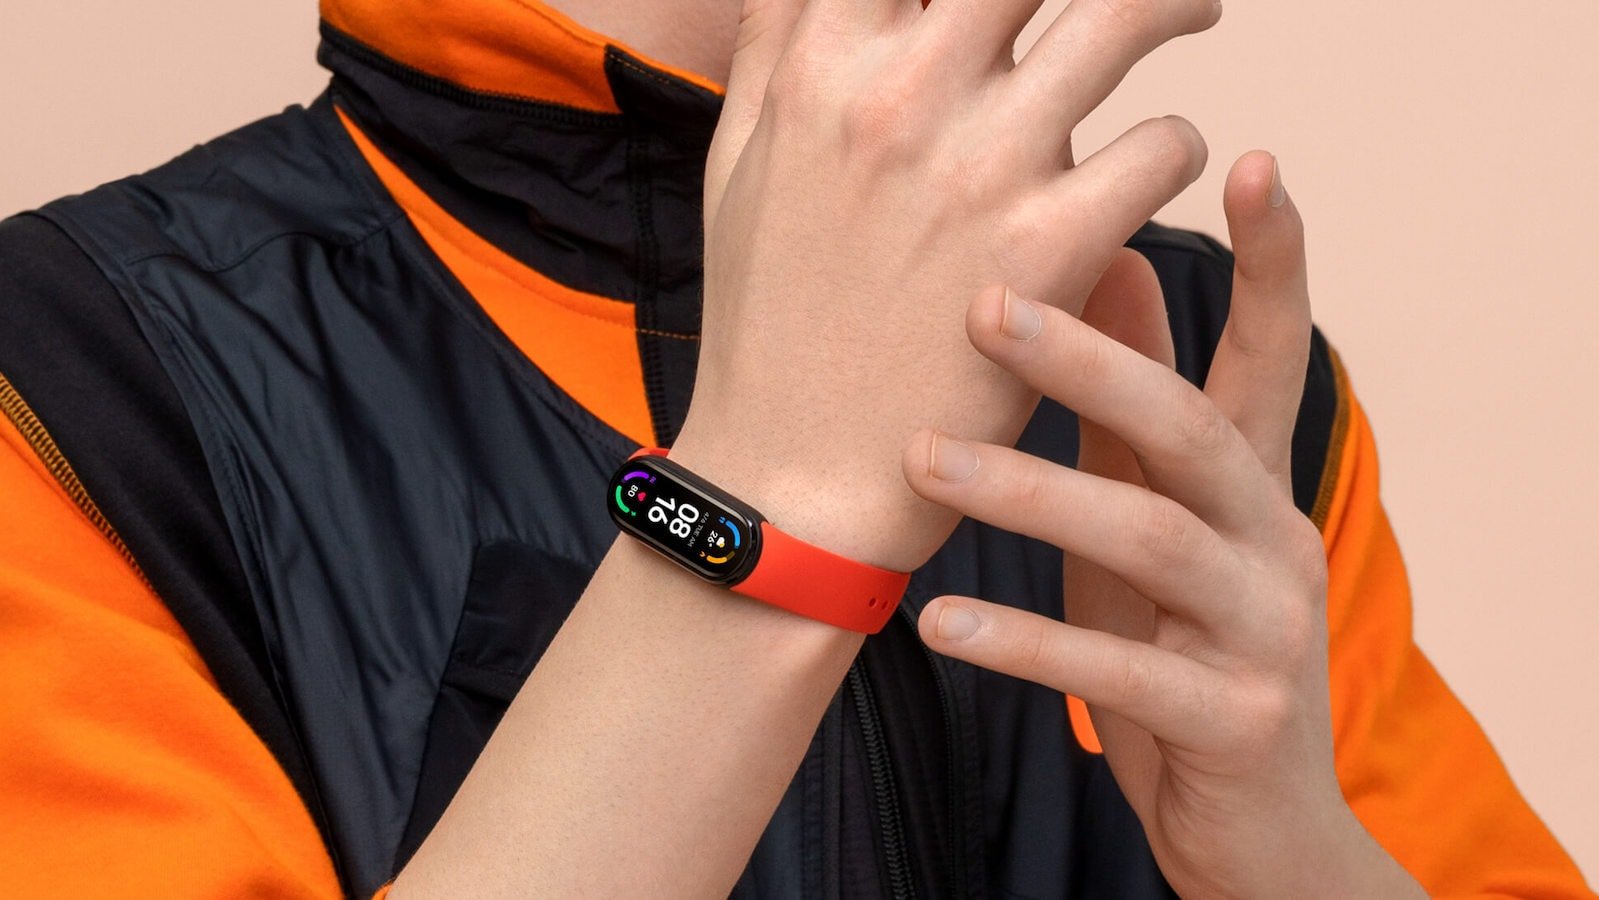 Xiaomi Mi Smart Band 6 fitness tracker includes 30 workouts & day-to-day health tracking